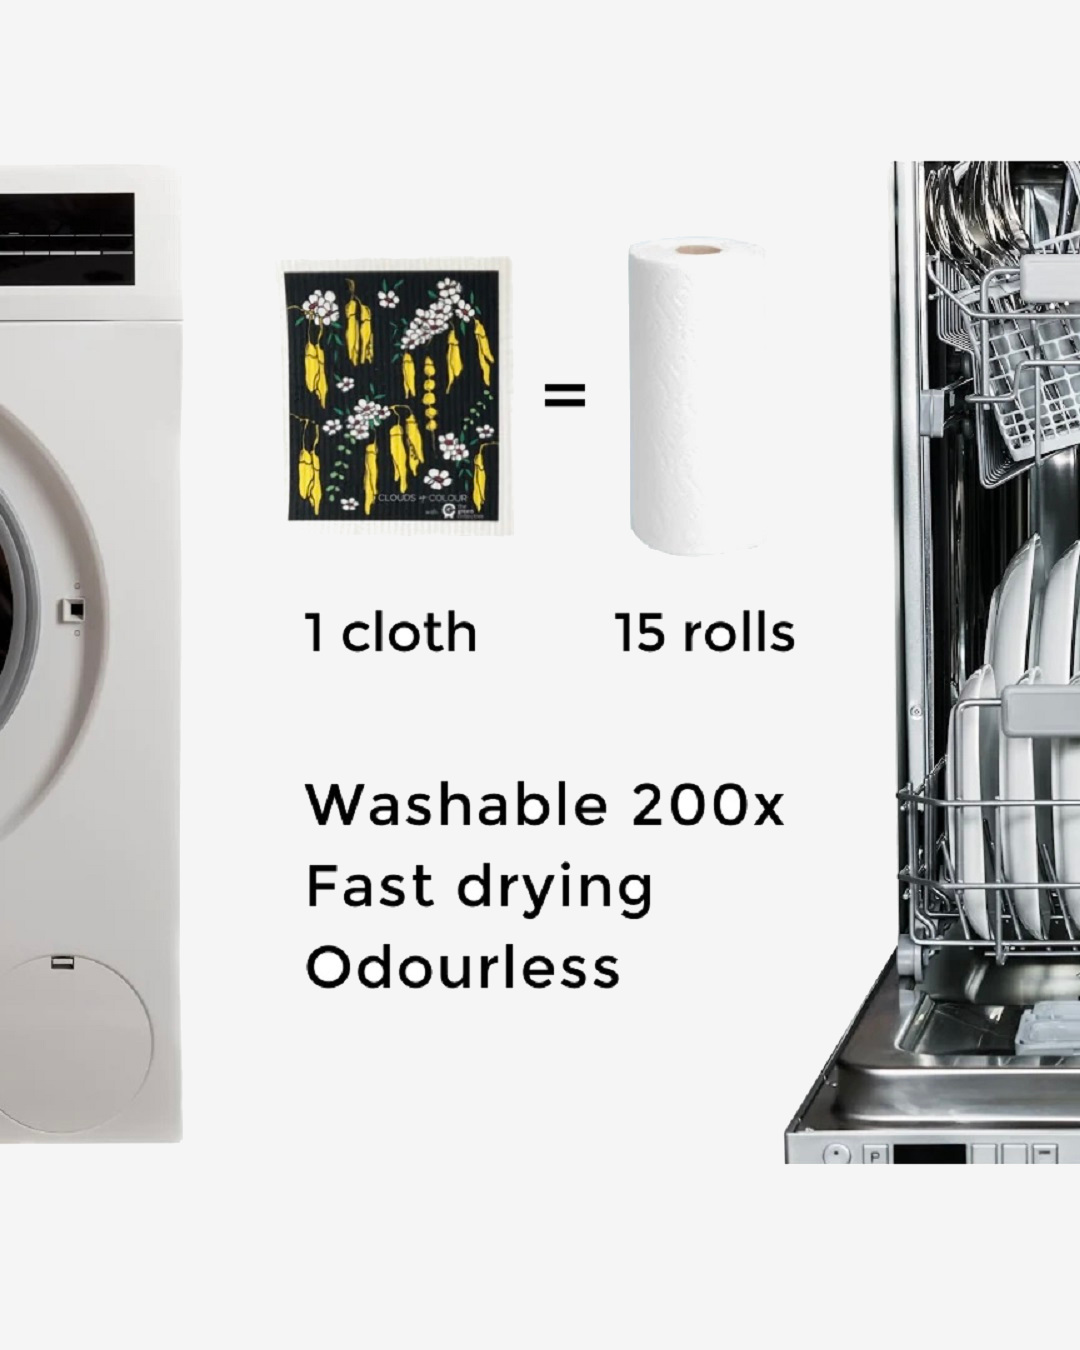 Washing machine and dishwasher with cloth and handy towels on it